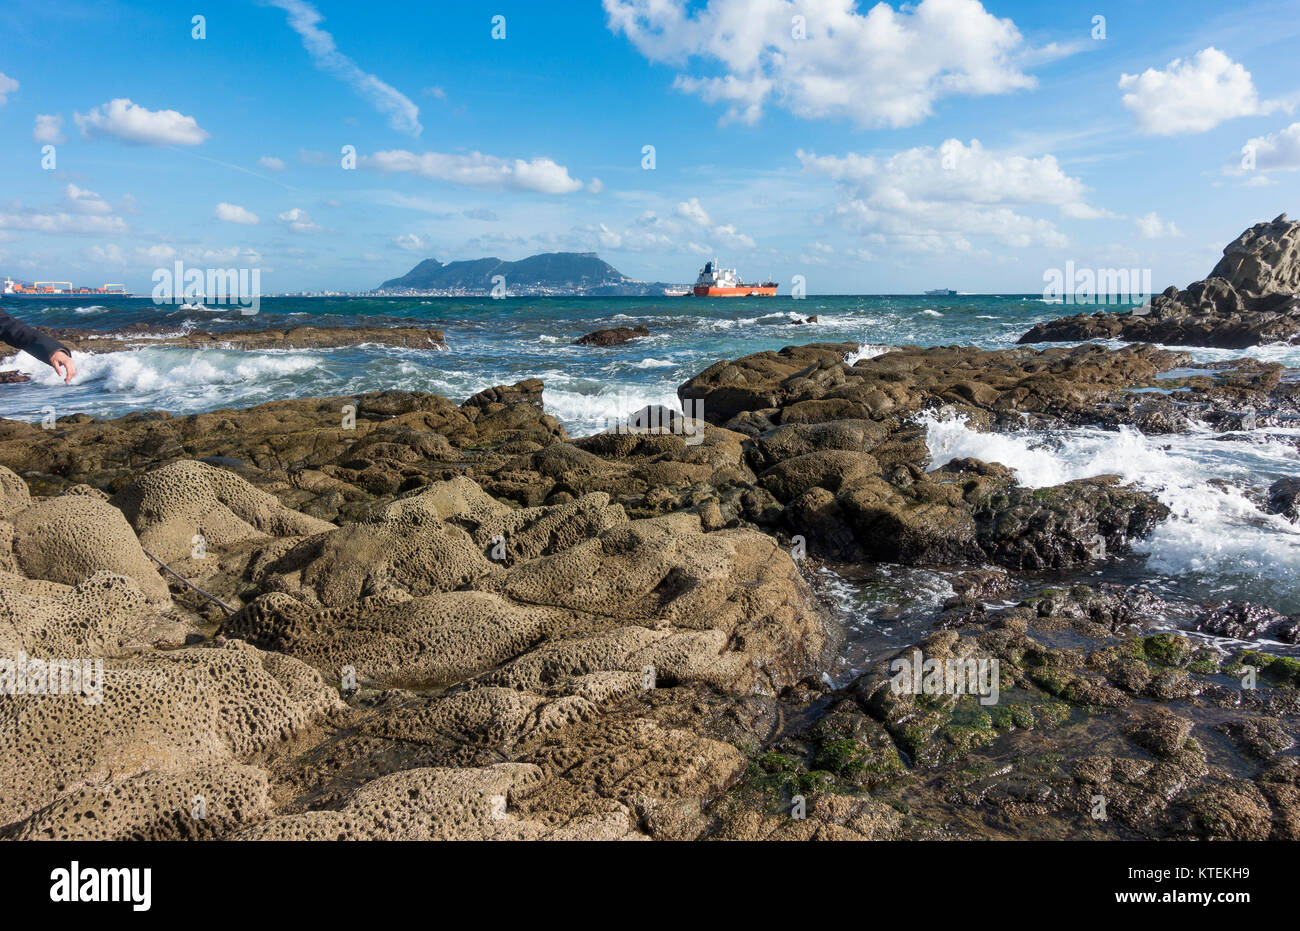 Strait of Gibraltar, with the Western face of the rock of Gibraltar and cargo ships, from Algeciras, Spain. Stock Photo